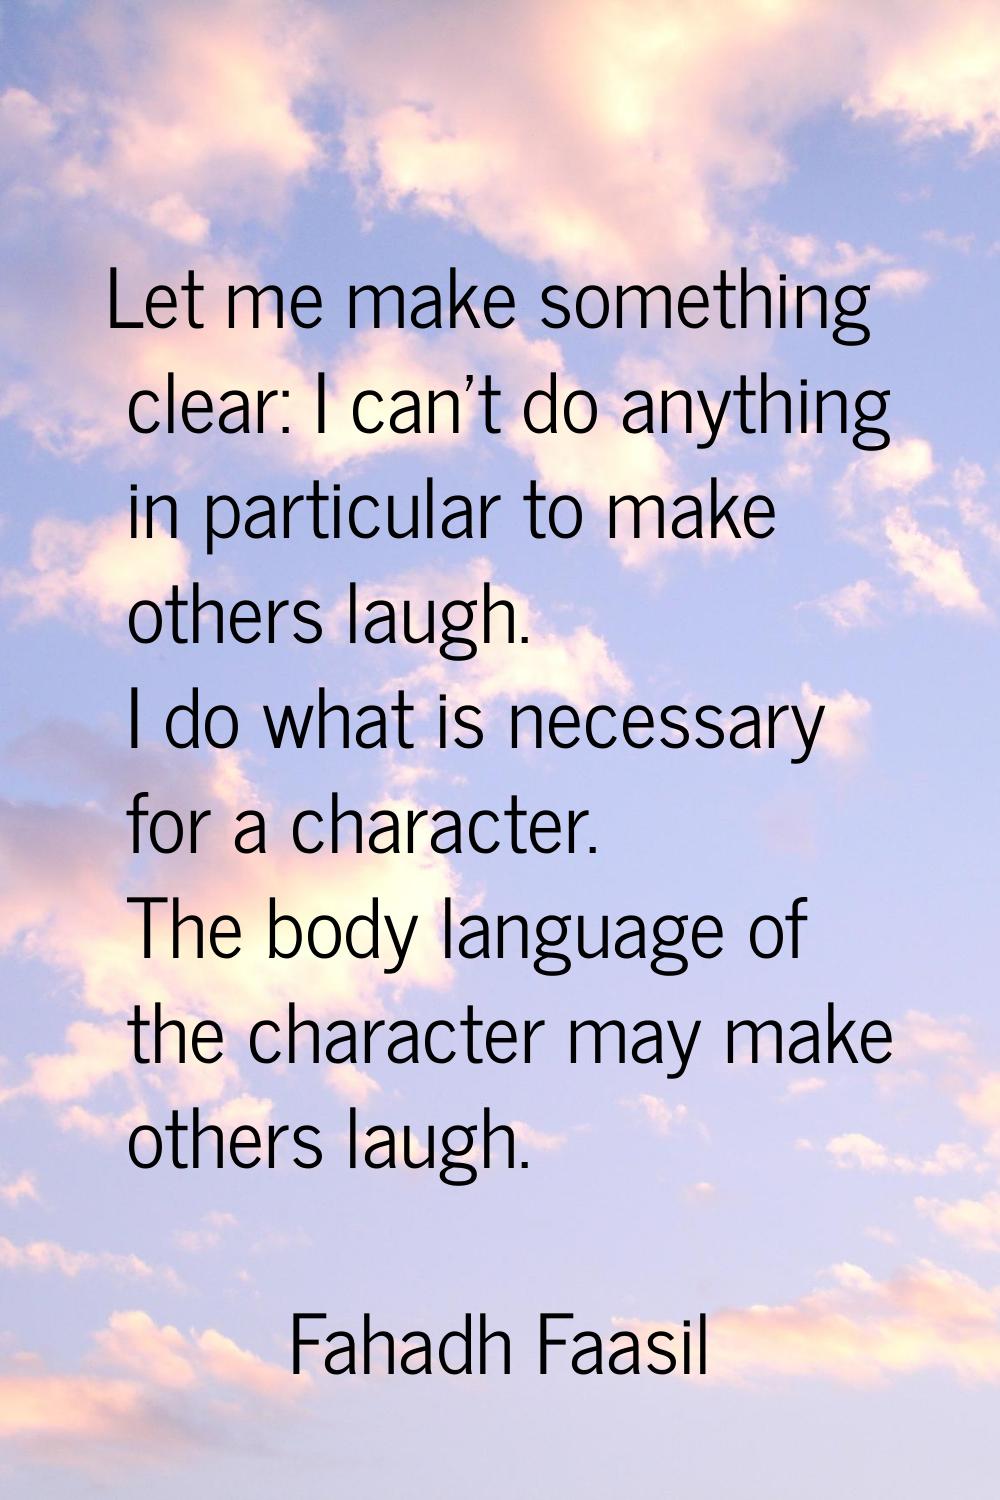 Let me make something clear: I can't do anything in particular to make others laugh. I do what is n